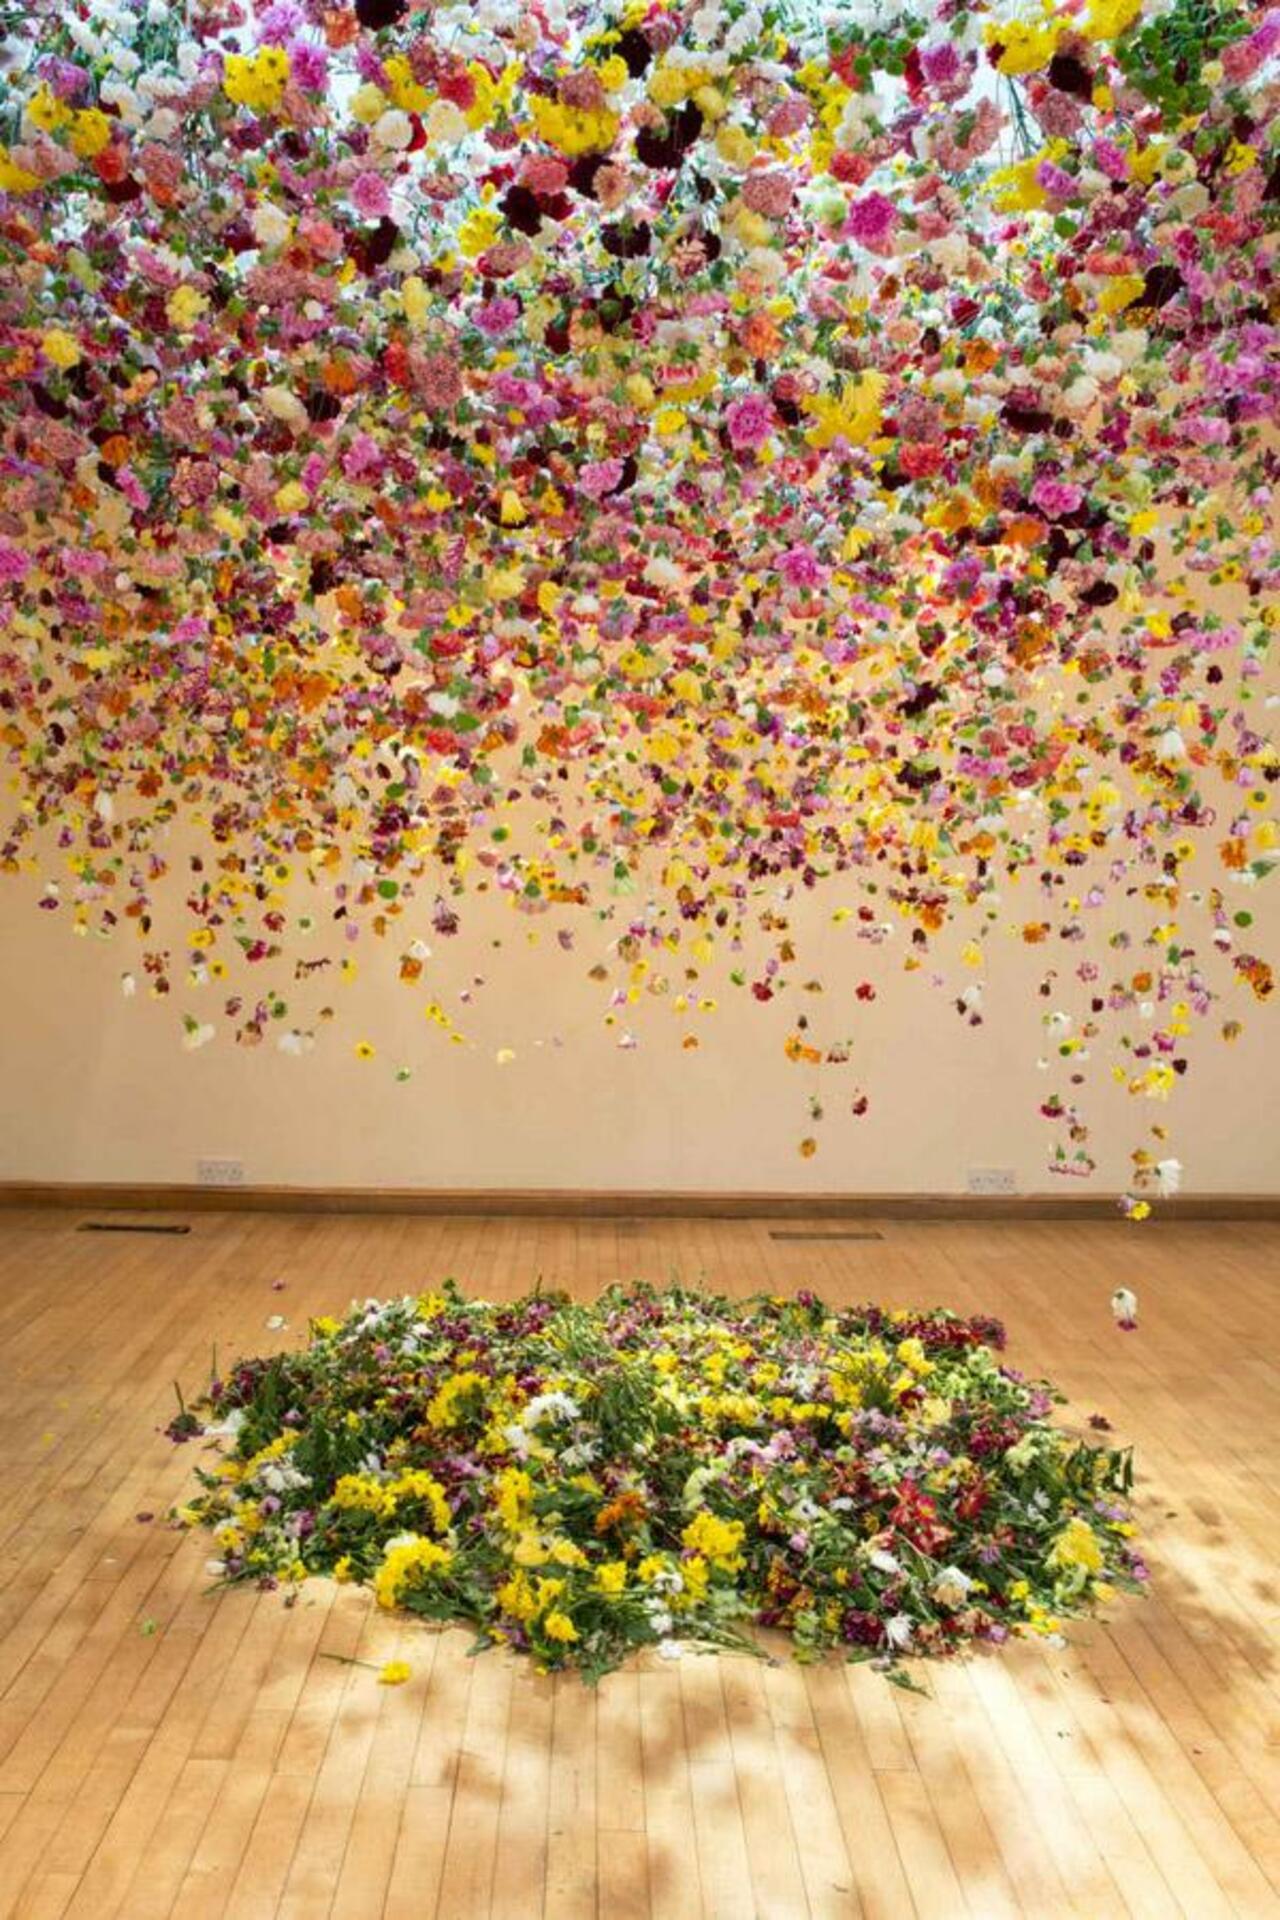 #Art #Artist #England #Fine #Flowers #homedecor
Please RT: http://www.rmhomedecor.com/architecture-2/suspended-floral-installations-from-rebecca-louise-law/ http://t.co/J43bKw4AFR